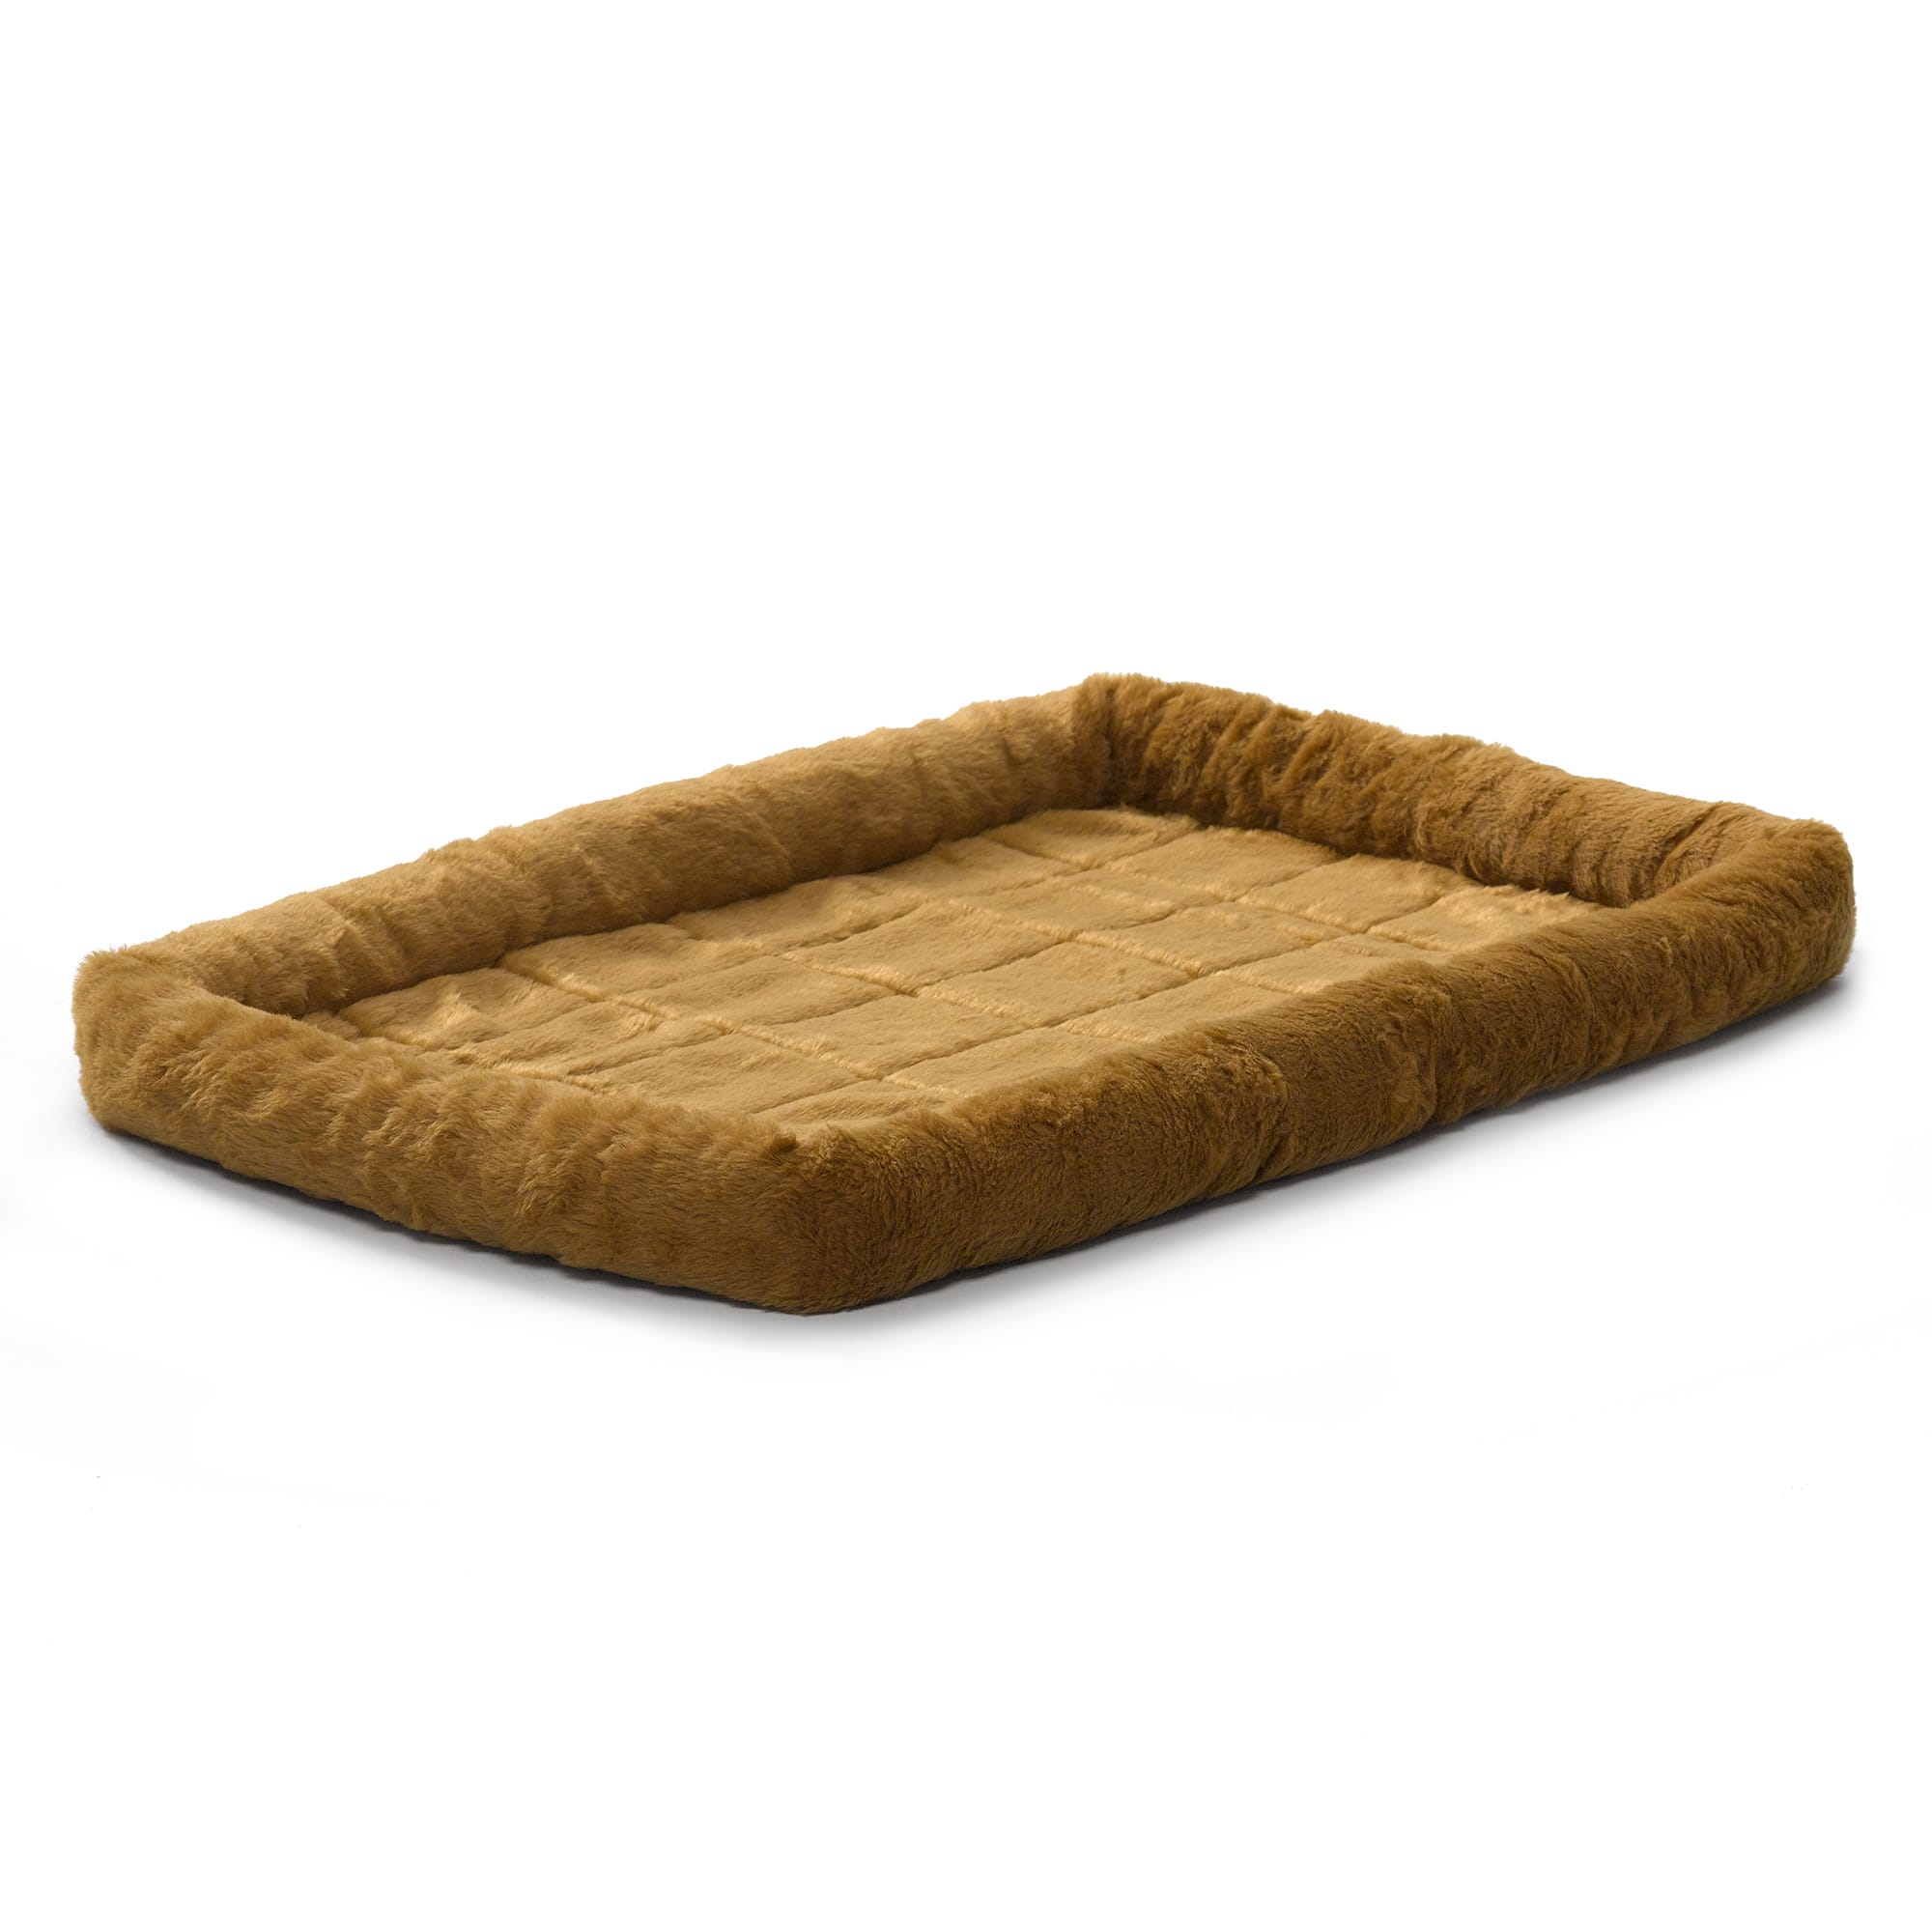 Photos - Dog Bed / Basket Midwest Quiet Time Bolster Cinnamon Dog Bed, 48" L X 30" W, XX-Lar 